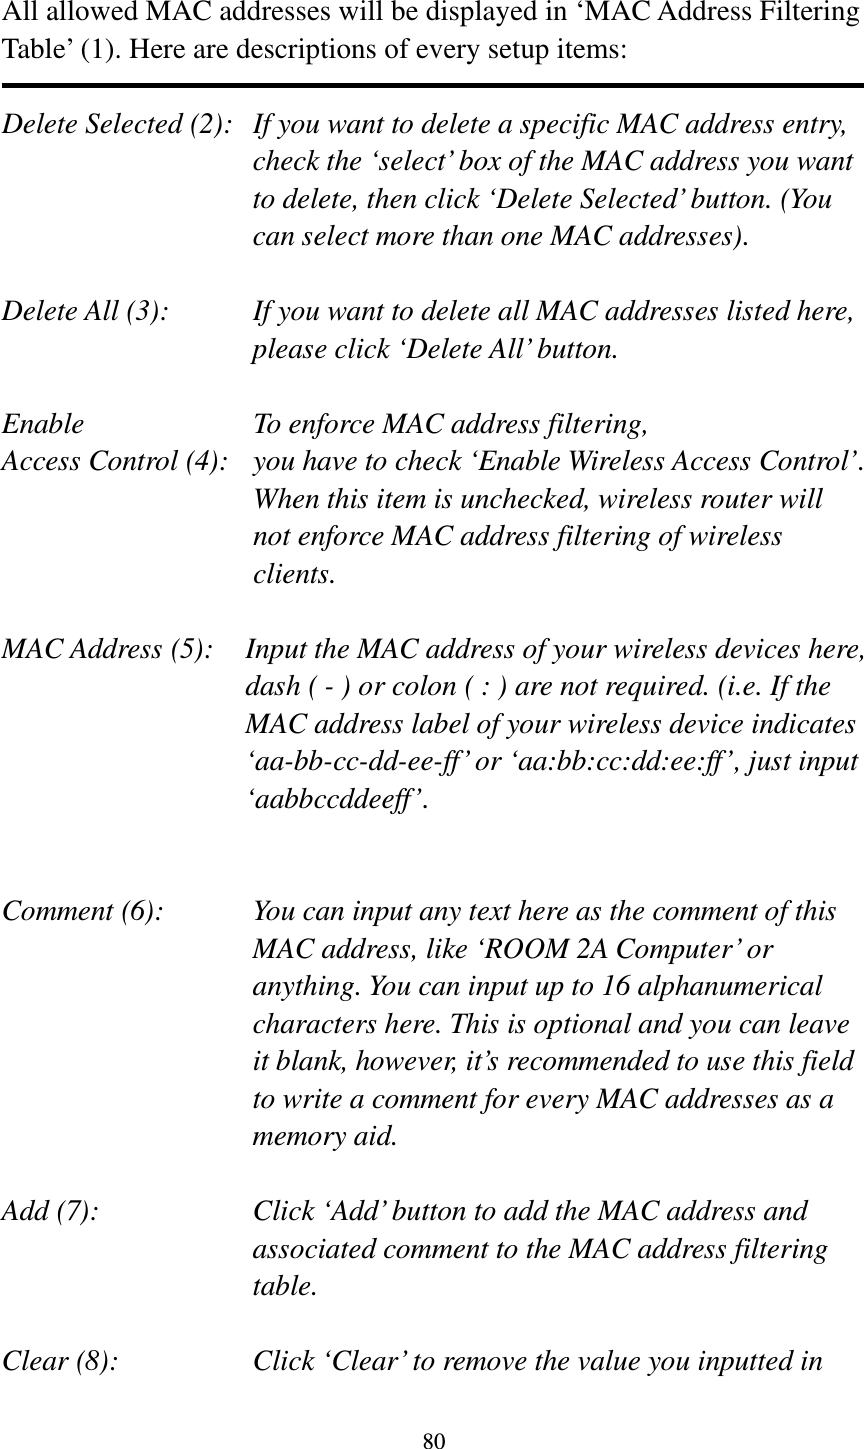 80  All allowed MAC addresses will be displayed in ‘MAC Address Filtering Table’ (1). Here are descriptions of every setup items:  Delete Selected (2):   If you want to delete a specific MAC address entry, check the ‘select’ box of the MAC address you want to delete, then click ‘Delete Selected’ button. (You can select more than one MAC addresses).  Delete All (3):    If you want to delete all MAC addresses listed here, please click ‘Delete All’ button.  Enable      To enforce MAC address filtering, Access Control (4):   you have to check ‘Enable Wireless Access Control’. When this item is unchecked, wireless router will not enforce MAC address filtering of wireless clients.  MAC Address (5):    Input the MAC address of your wireless devices here, dash ( - ) or colon ( : ) are not required. (i.e. If the MAC address label of your wireless device indicates ‘aa-bb-cc-dd-ee-ff’ or ‘aa:bb:cc:dd:ee:ff’, just input ‘aabbccddeeff’.   Comment (6):      You can input any text here as the comment of this       MAC address, like ‘ROOM 2A Computer’ or         anything. You can input up to 16 alphanumerical   characters here. This is optional and you can leave   it blank, however, it’s recommended to use this field   to write a comment for every MAC addresses as a   memory aid.  Add (7):    Click ‘Add’ button to add the MAC address and associated comment to the MAC address filtering table.  Clear (8):    Click ‘Clear’ to remove the value you inputted in 